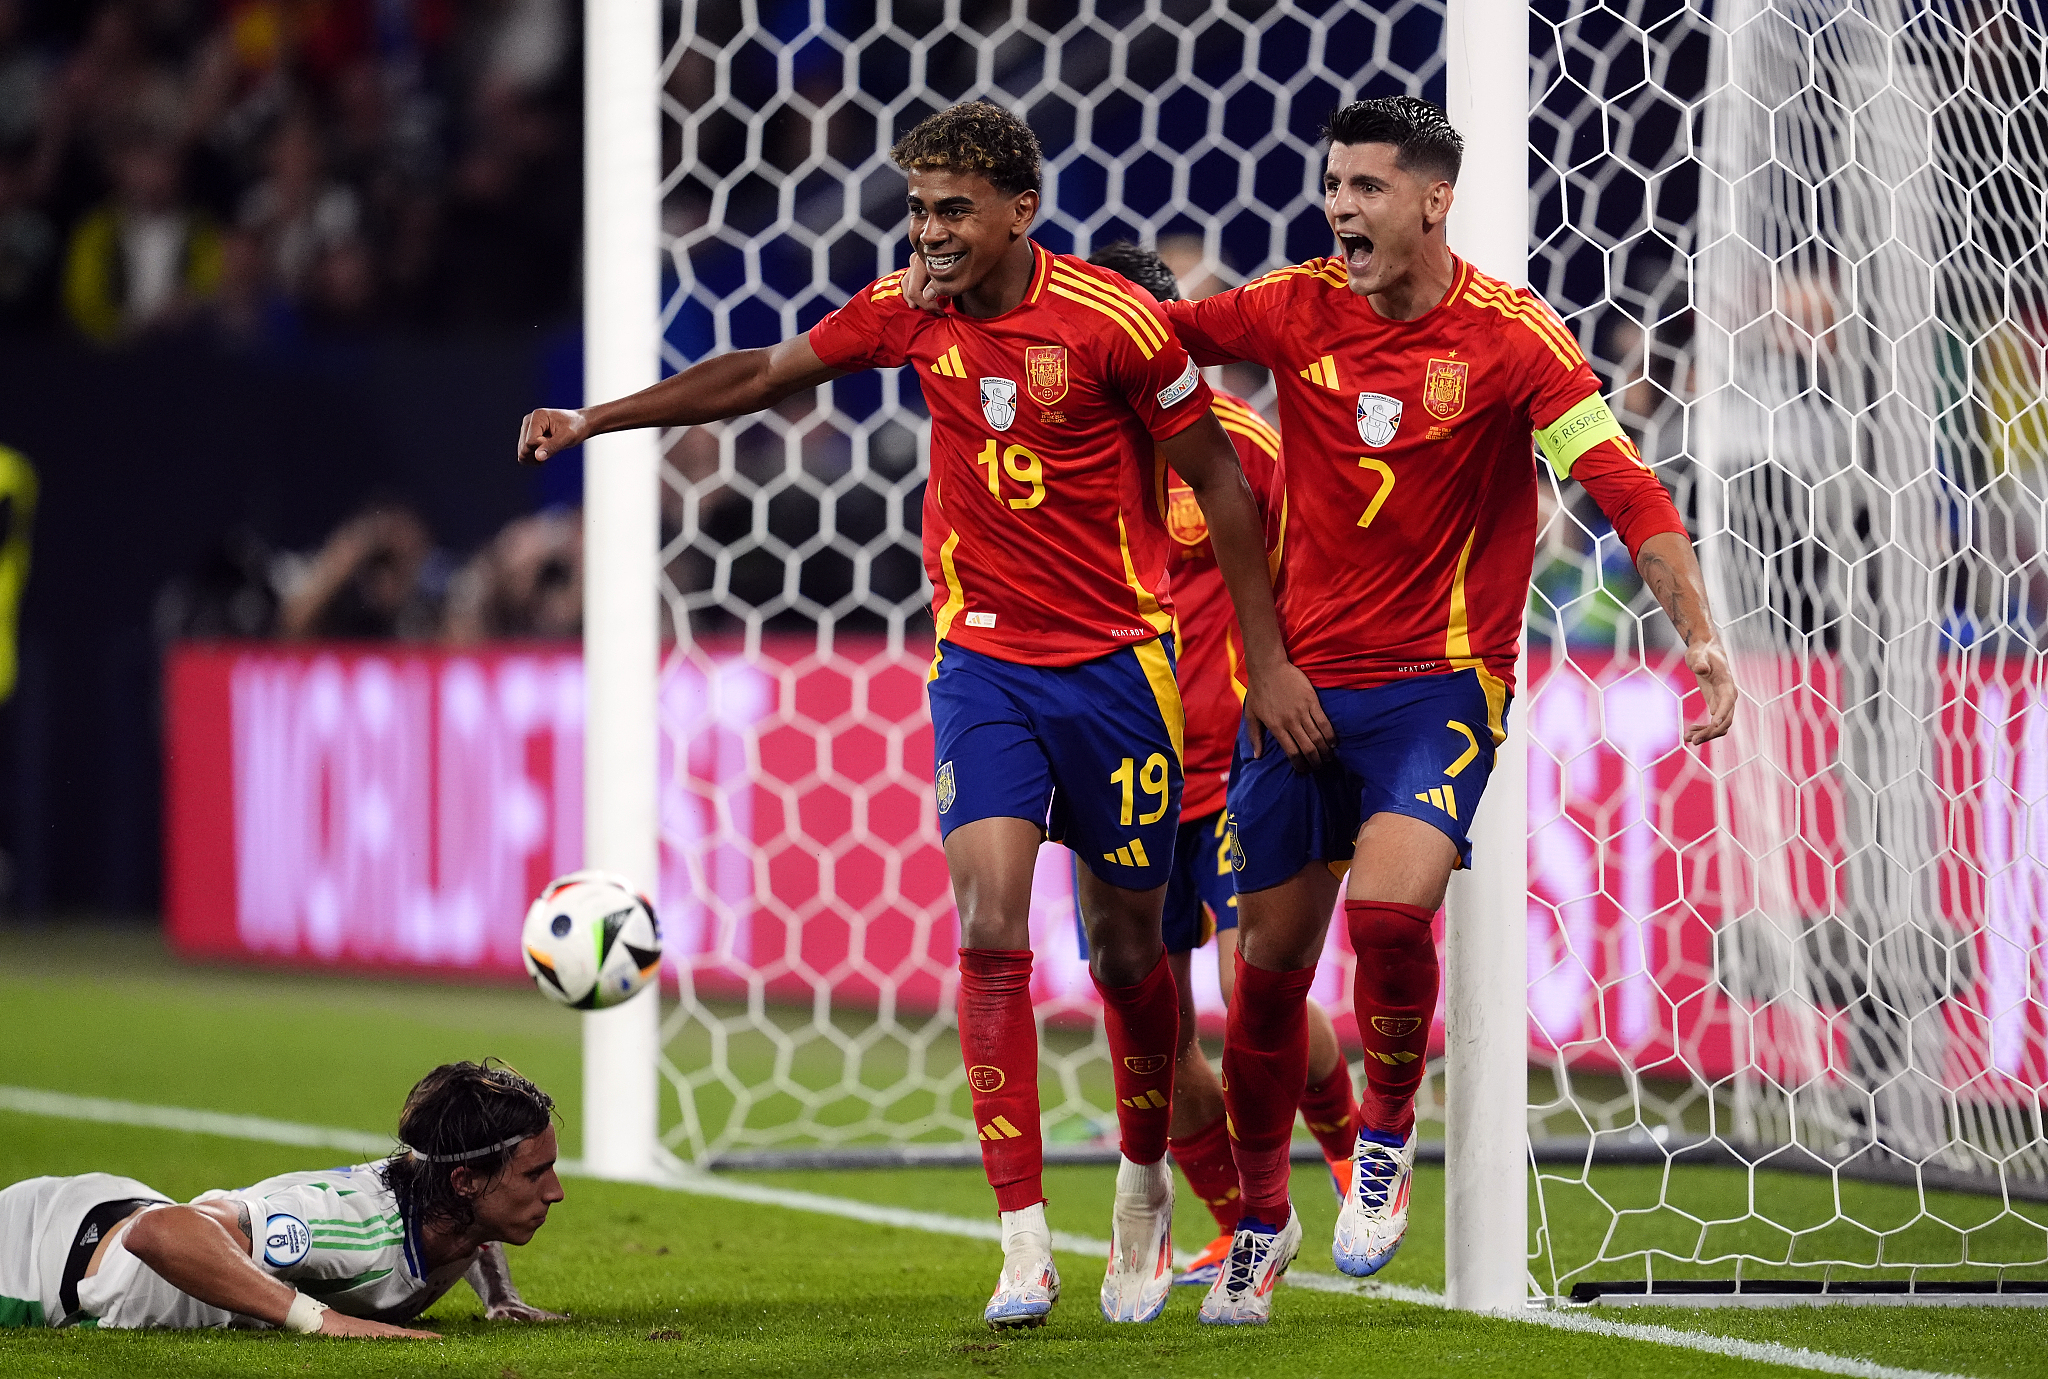 Players of Spain celebrate their 1-0 lead over Italy in the UEFA European Championship group game in at the Arena AufSchalke in Gelsenkirchen, Germany, June 20, 2024. /CFP